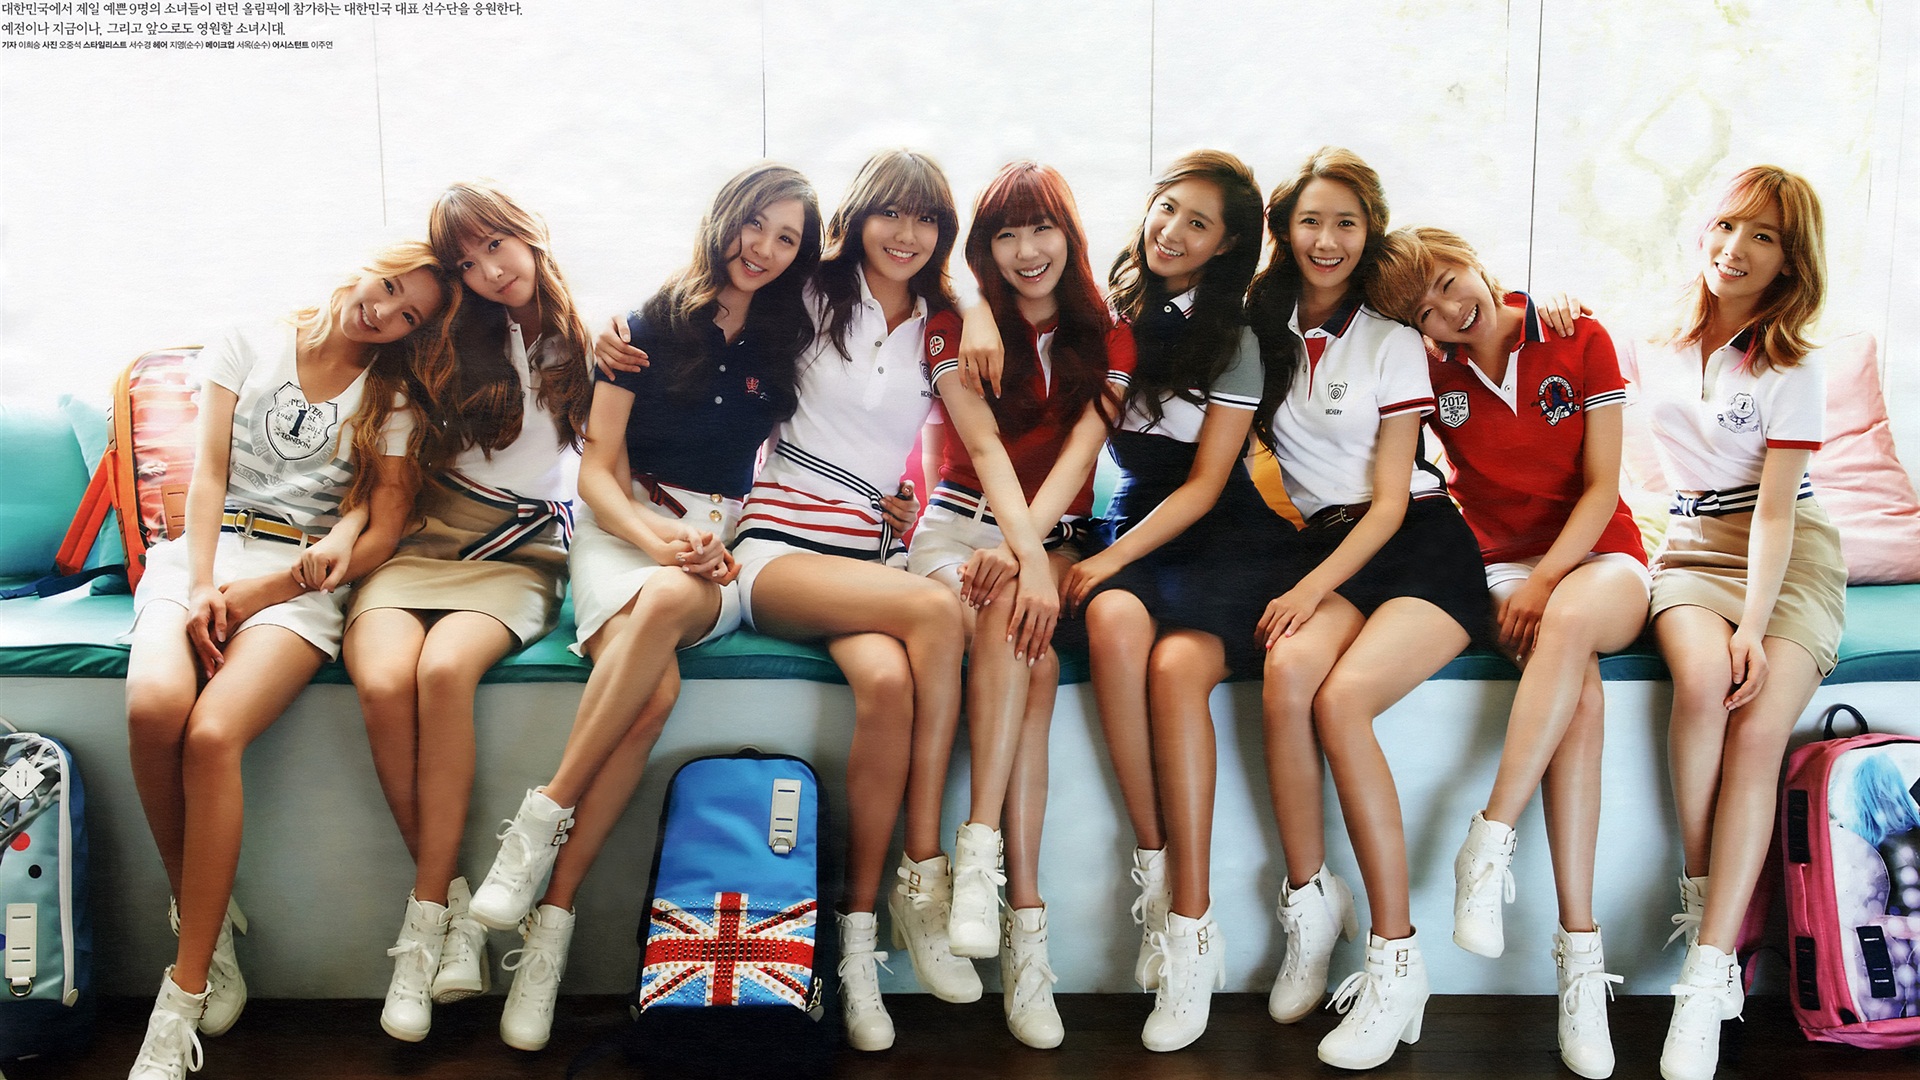 Girls Generation latest HD wallpapers collection #1 - 1920x1080